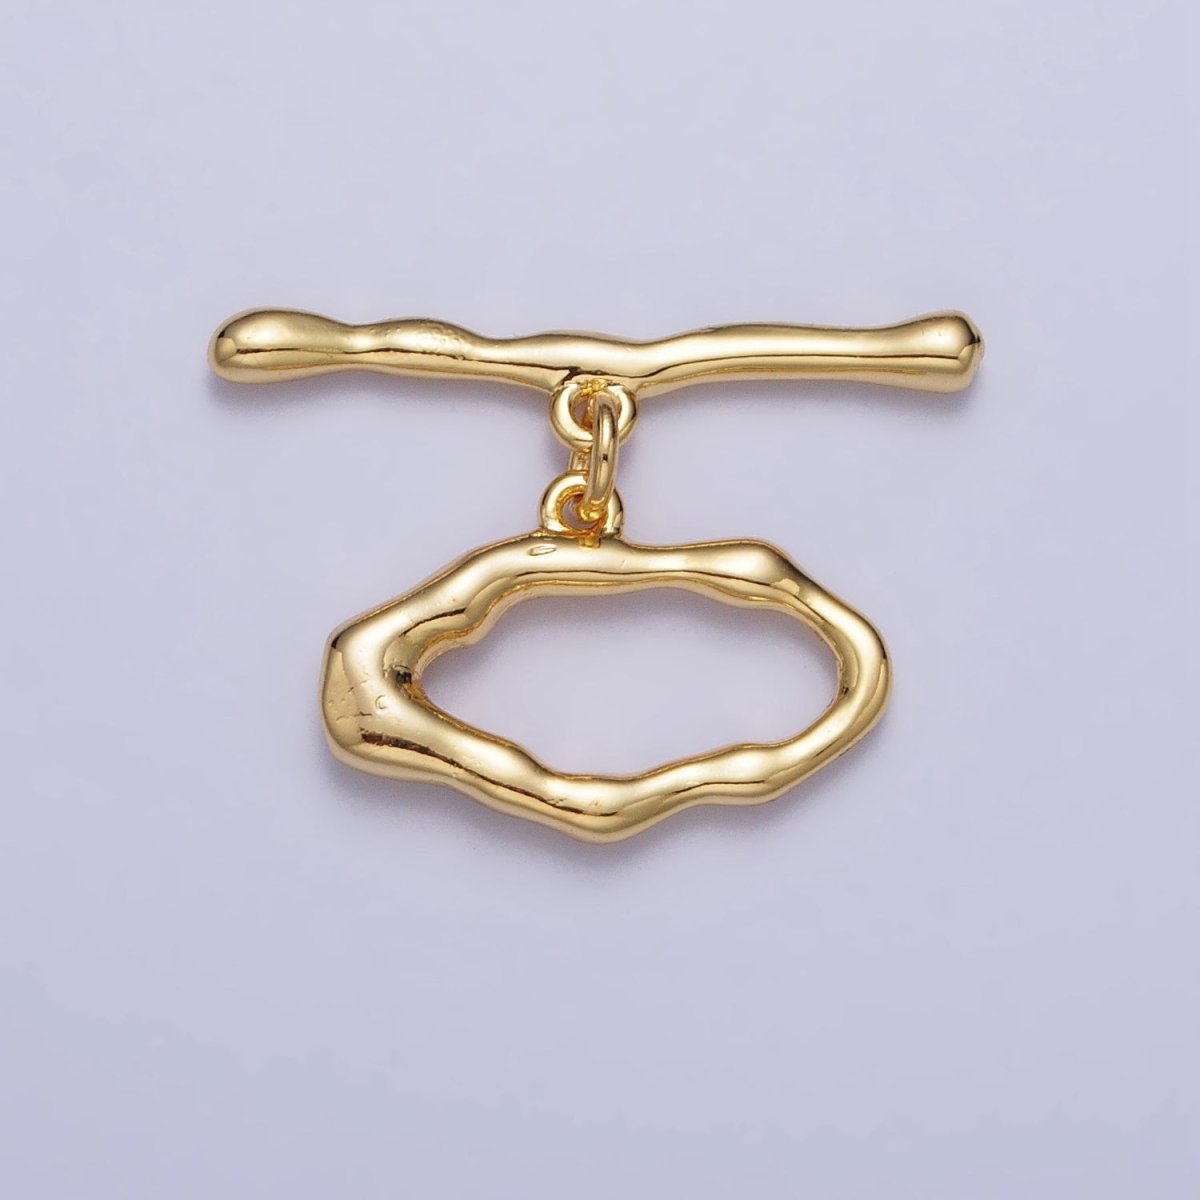 Gold Filled Geometric Abstract Toggle Clasps in Gold & Silver Jewelry Closure Supply | Z-098 Z-099 - DLUXCA